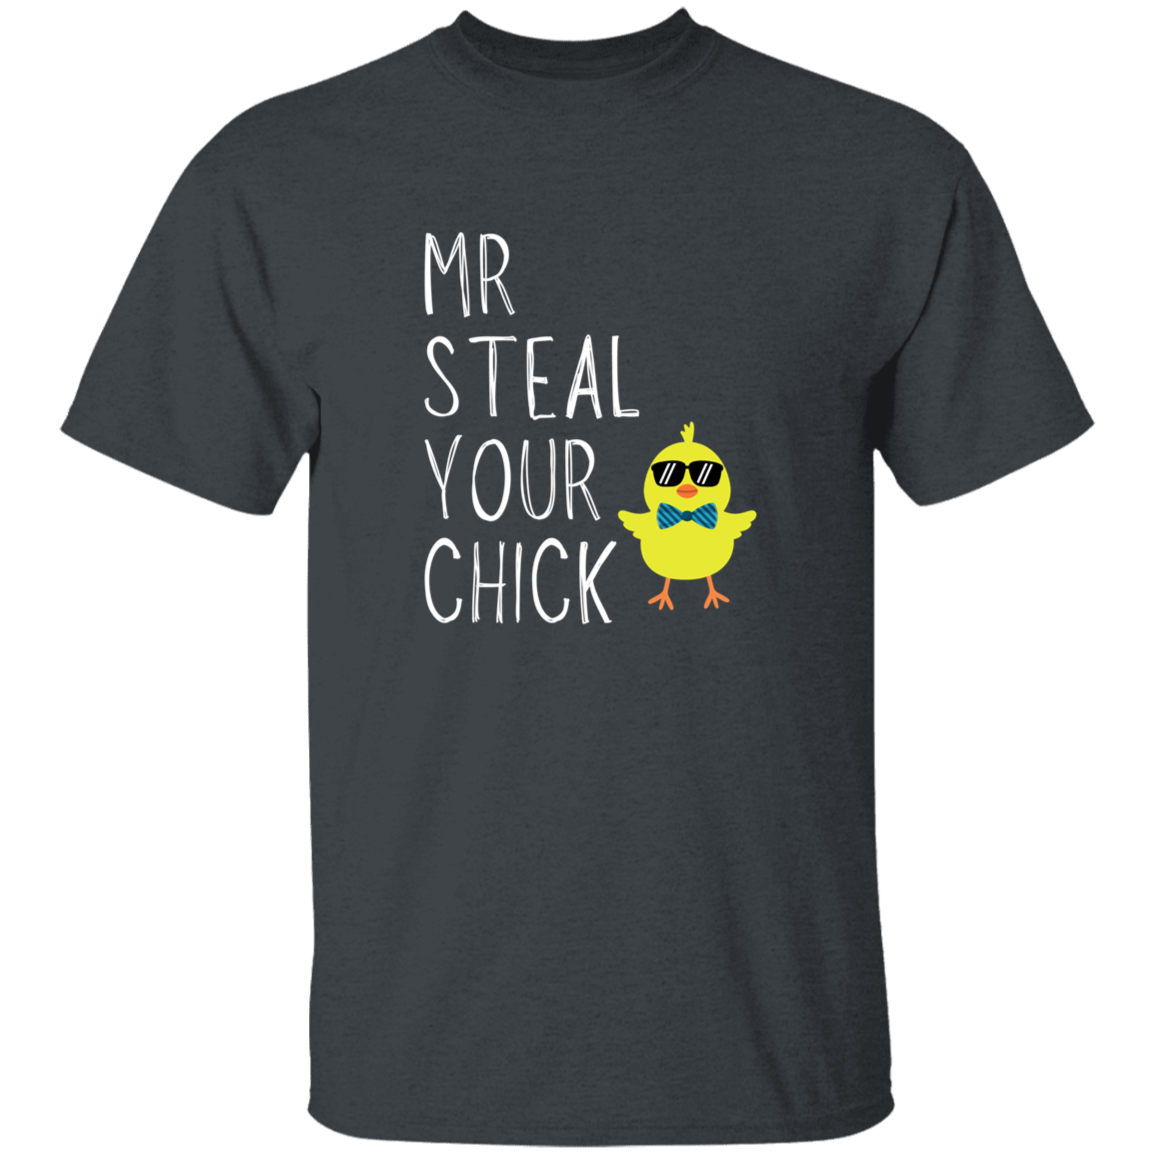 Mr Steal Your Chick Youth 5.3 oz 100% Cotton T-Shirt